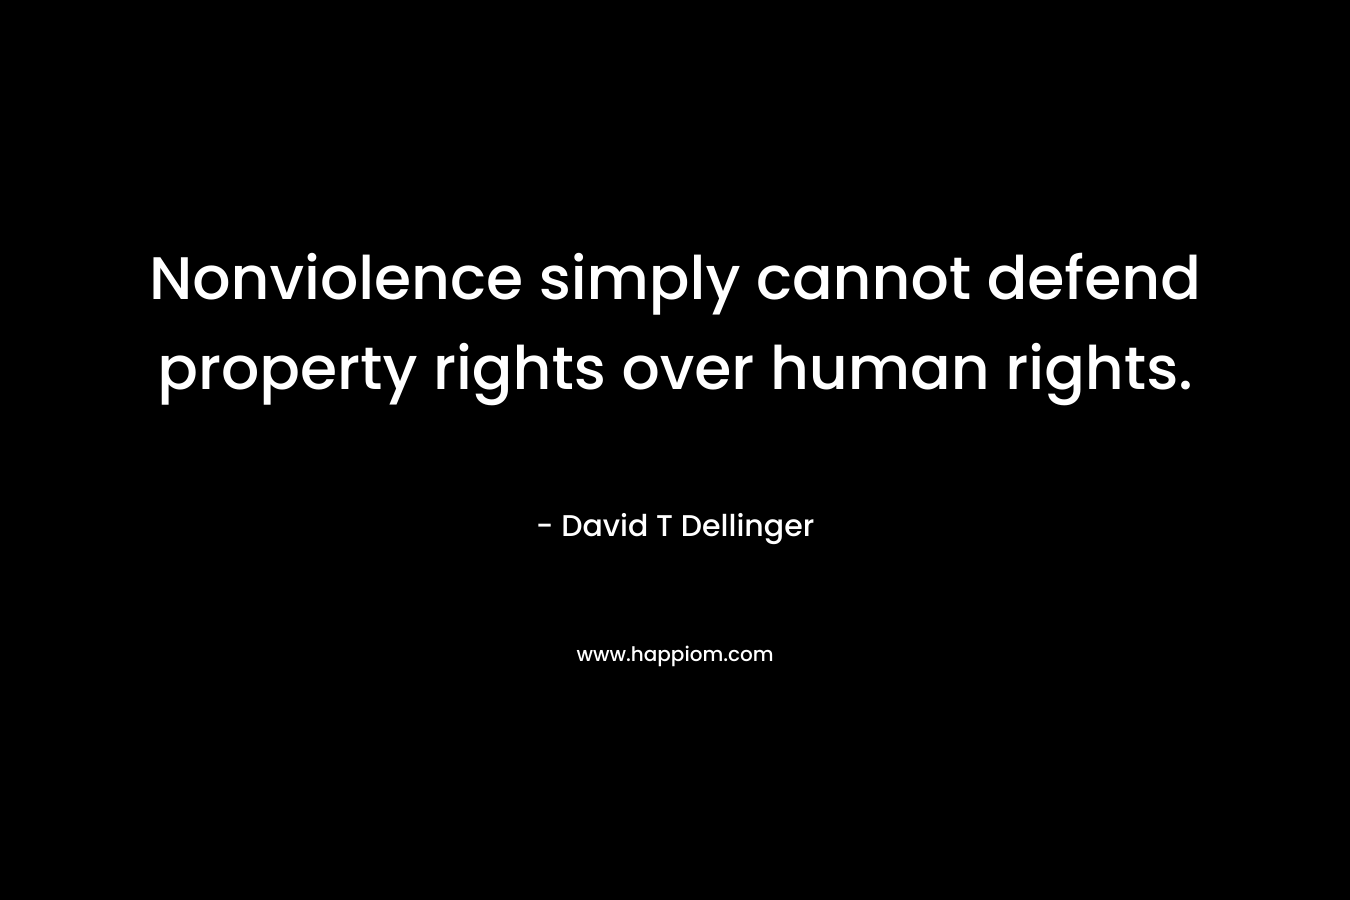 Nonviolence simply cannot defend property rights over human rights.